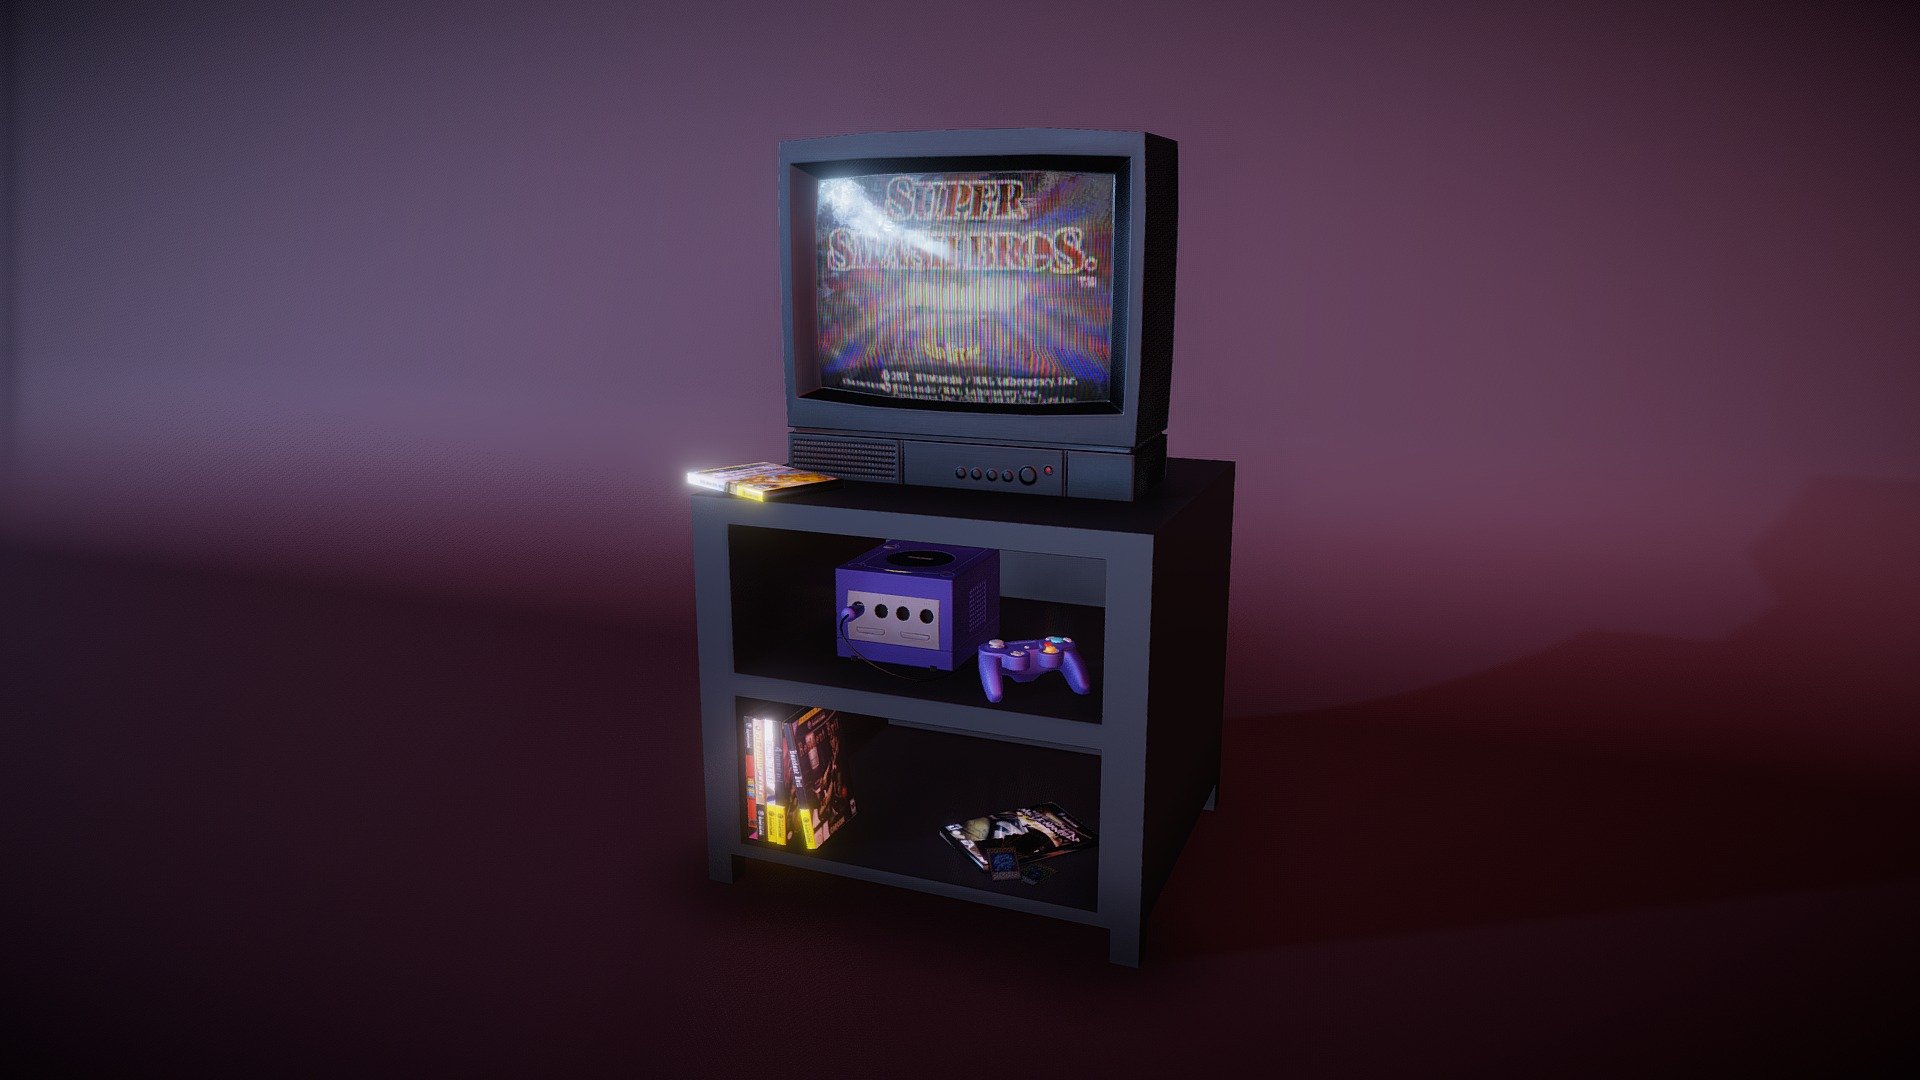 Just a fun project I did as homage to my childhood.

You can download the model for free, no credit is needed but if you want you can just link my instagram (@https.luis.ar) or a link to my sketchfab profile. Thanks! - My Gaming Stand - Download Free 3D model by LuisAR 3d model